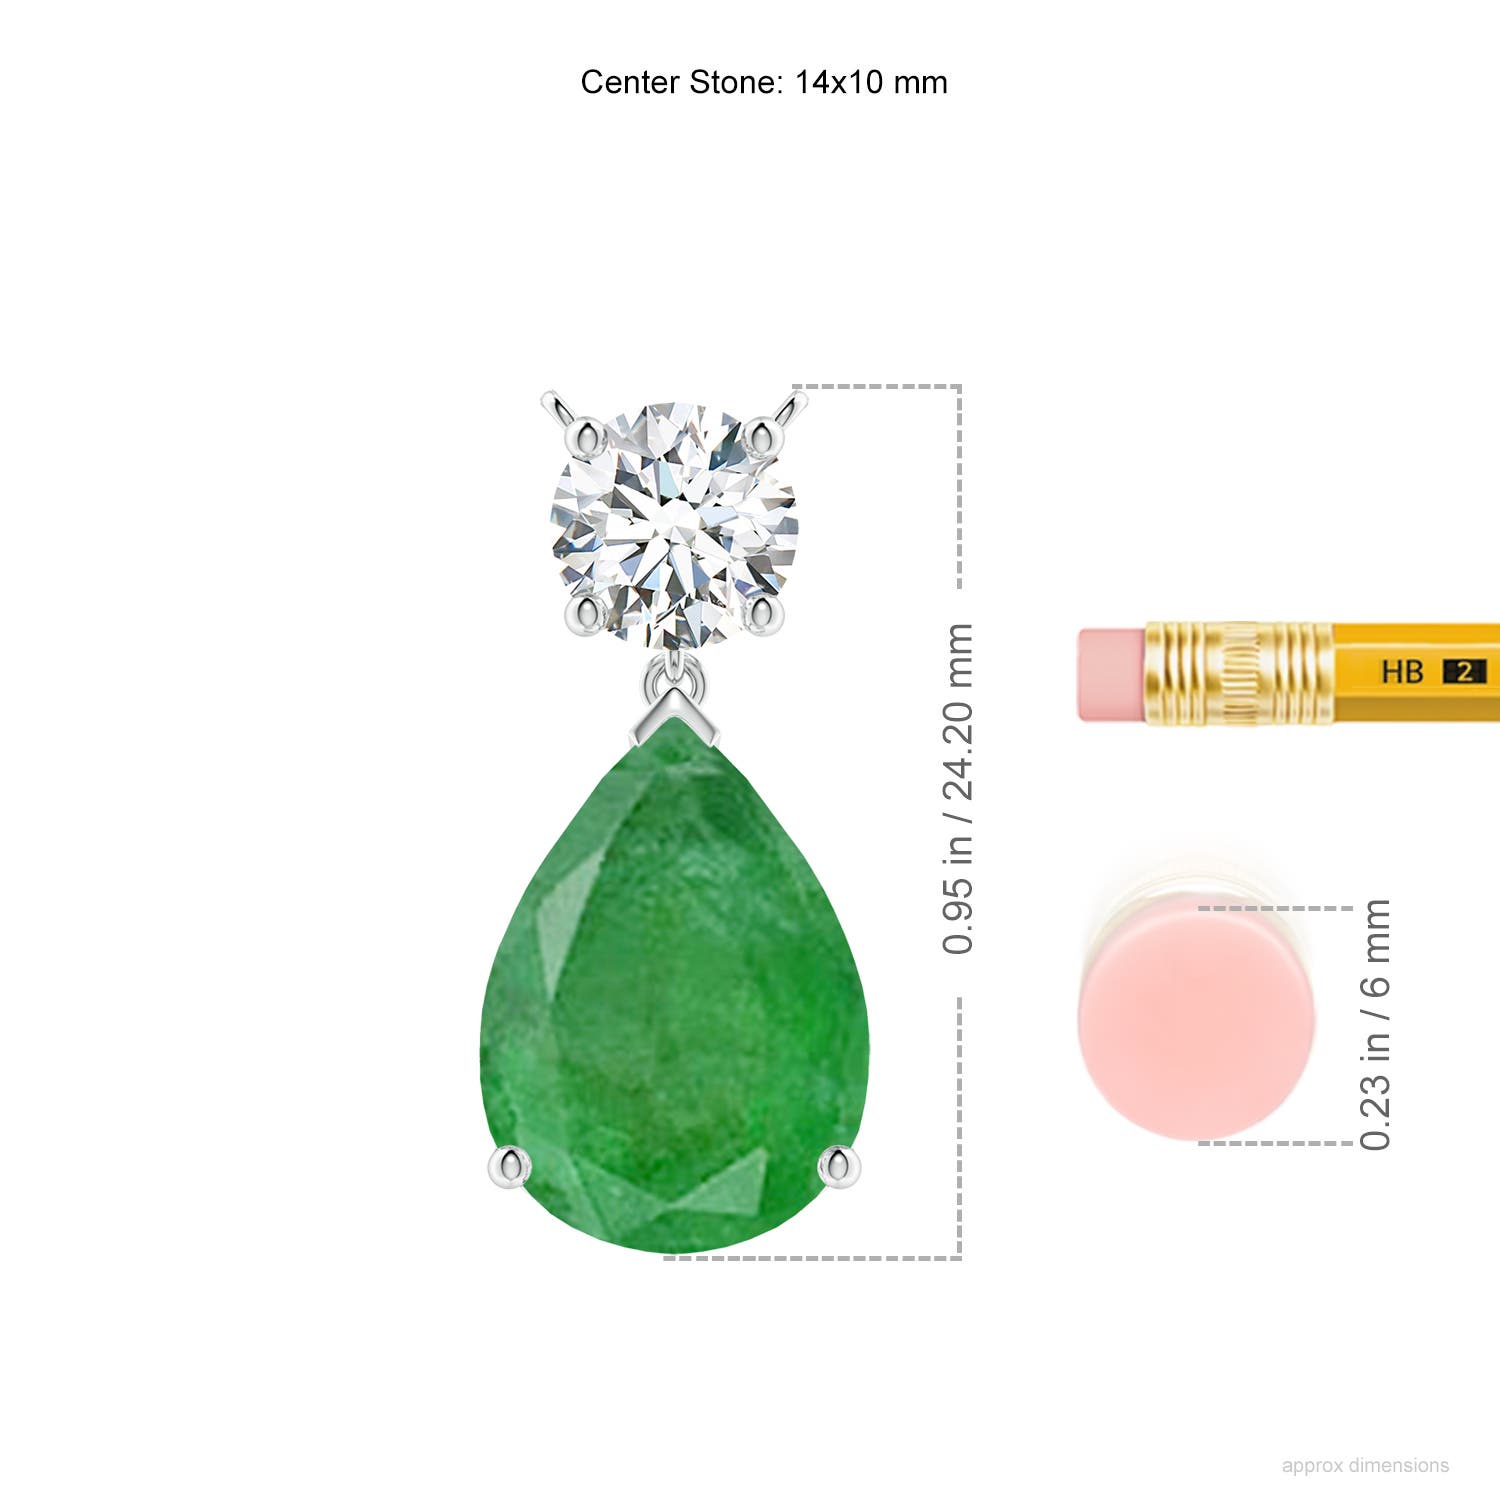 A - Emerald / 7.6 CT / 14 KT White Gold